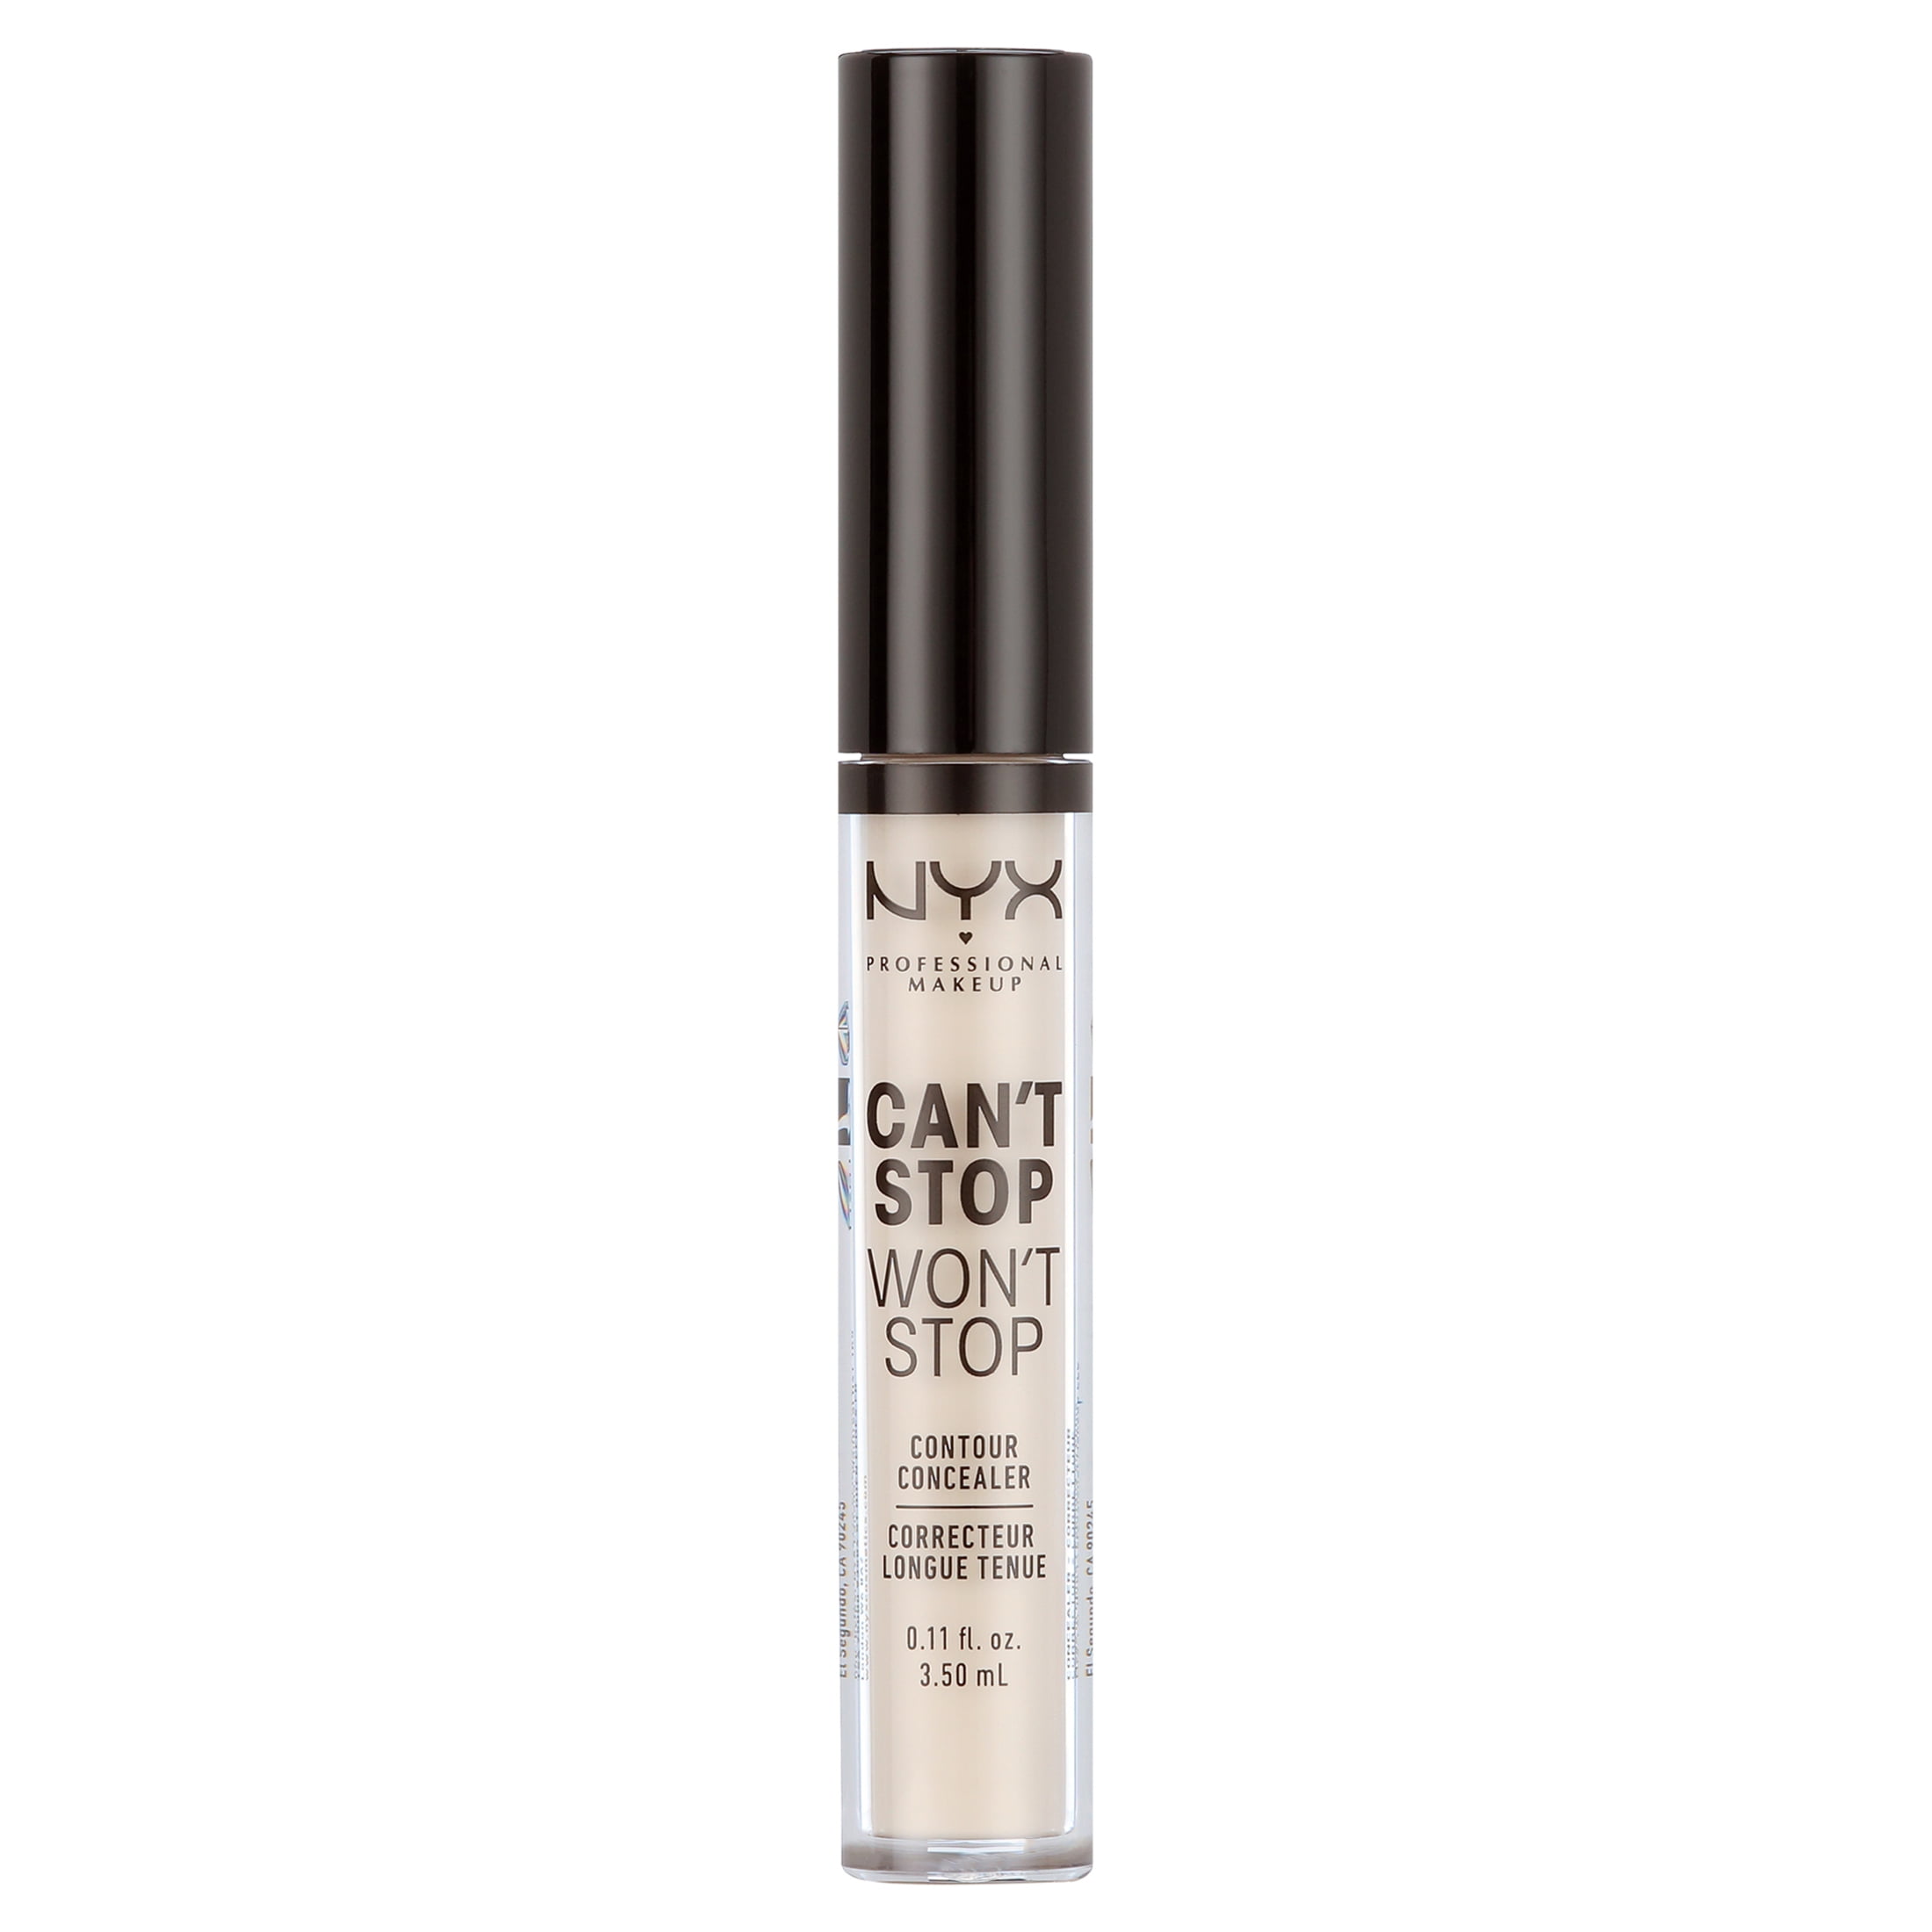 Finish, Matte Stop Makeup Vanilla Won\'t Concealer, Full Stop NYX Professional 24Hr Coverage Can\'t